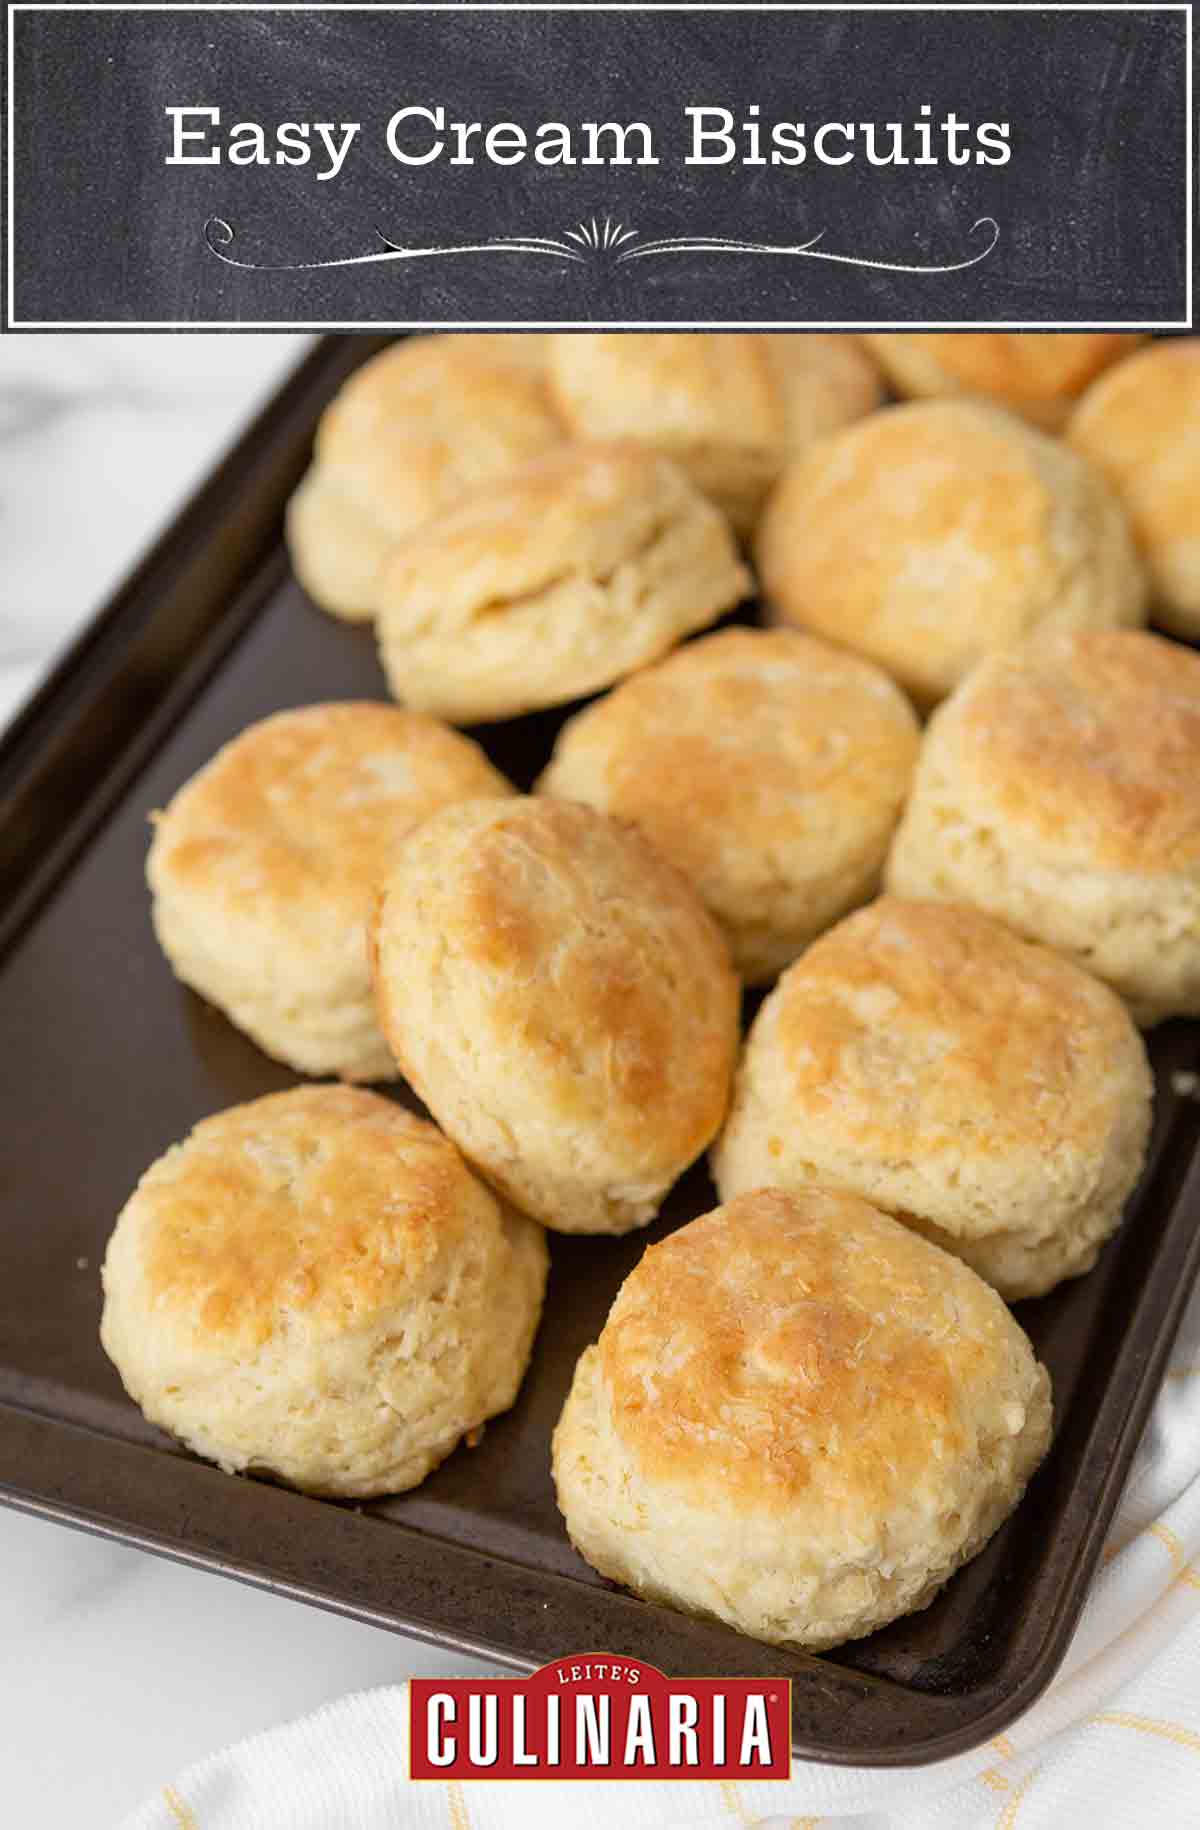 A baking sheet filled with cooked biscuits.